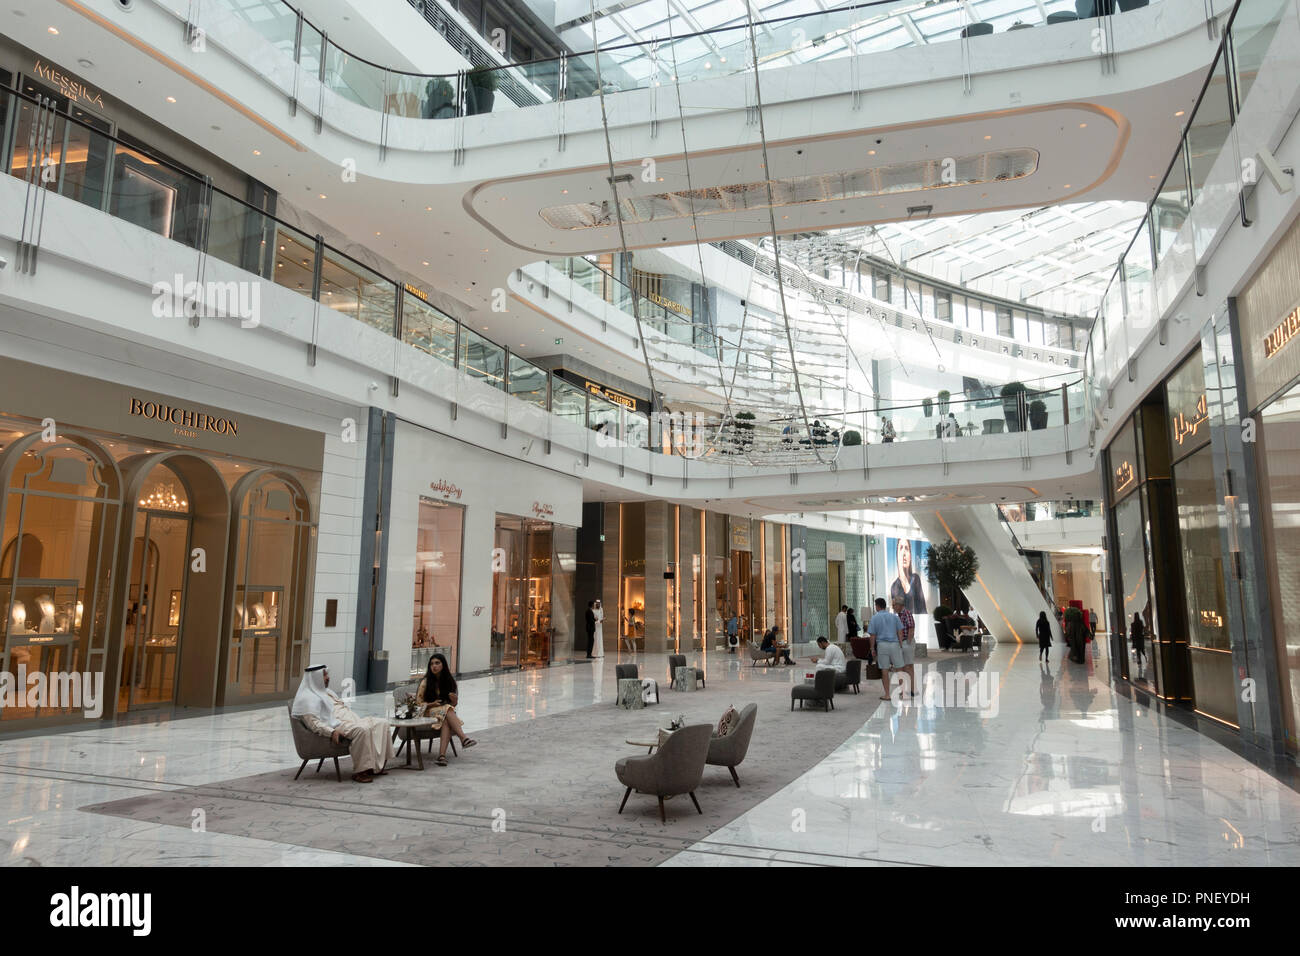 Interior of new extension to the Dubai Mall, the Fashion Avenue , housing high-end shops and shopping with luxury brands, in Dubai, United Arab Emirat Stock Photo